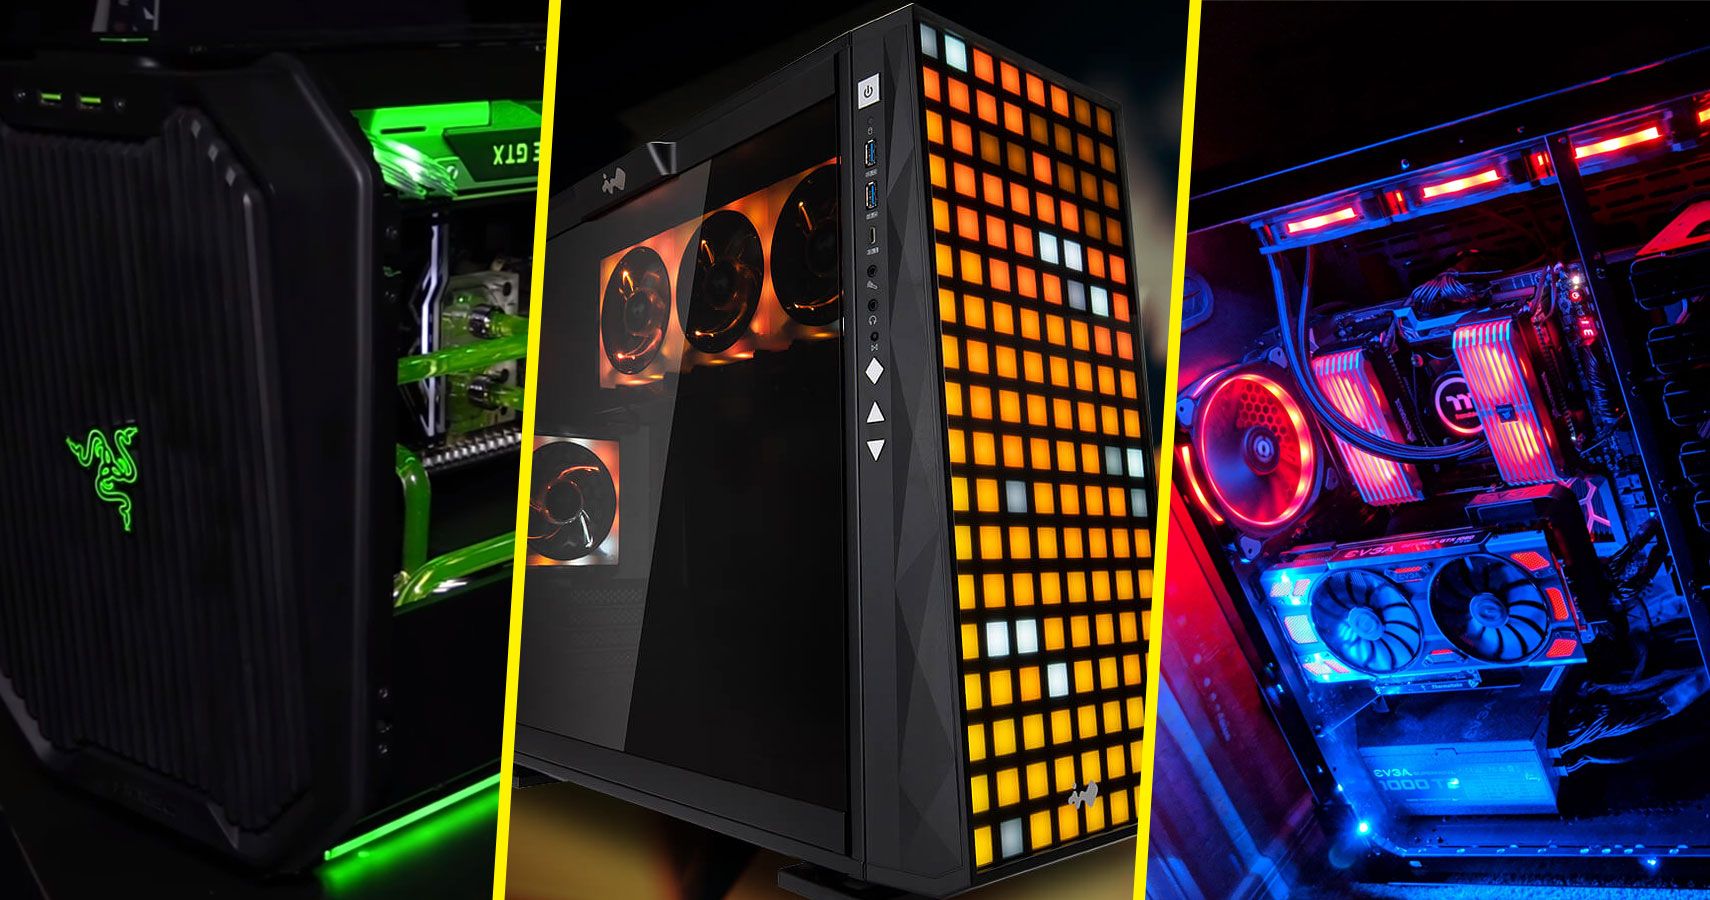 15 Coolest Pc Cases You Can Buy In 2020 Ranked